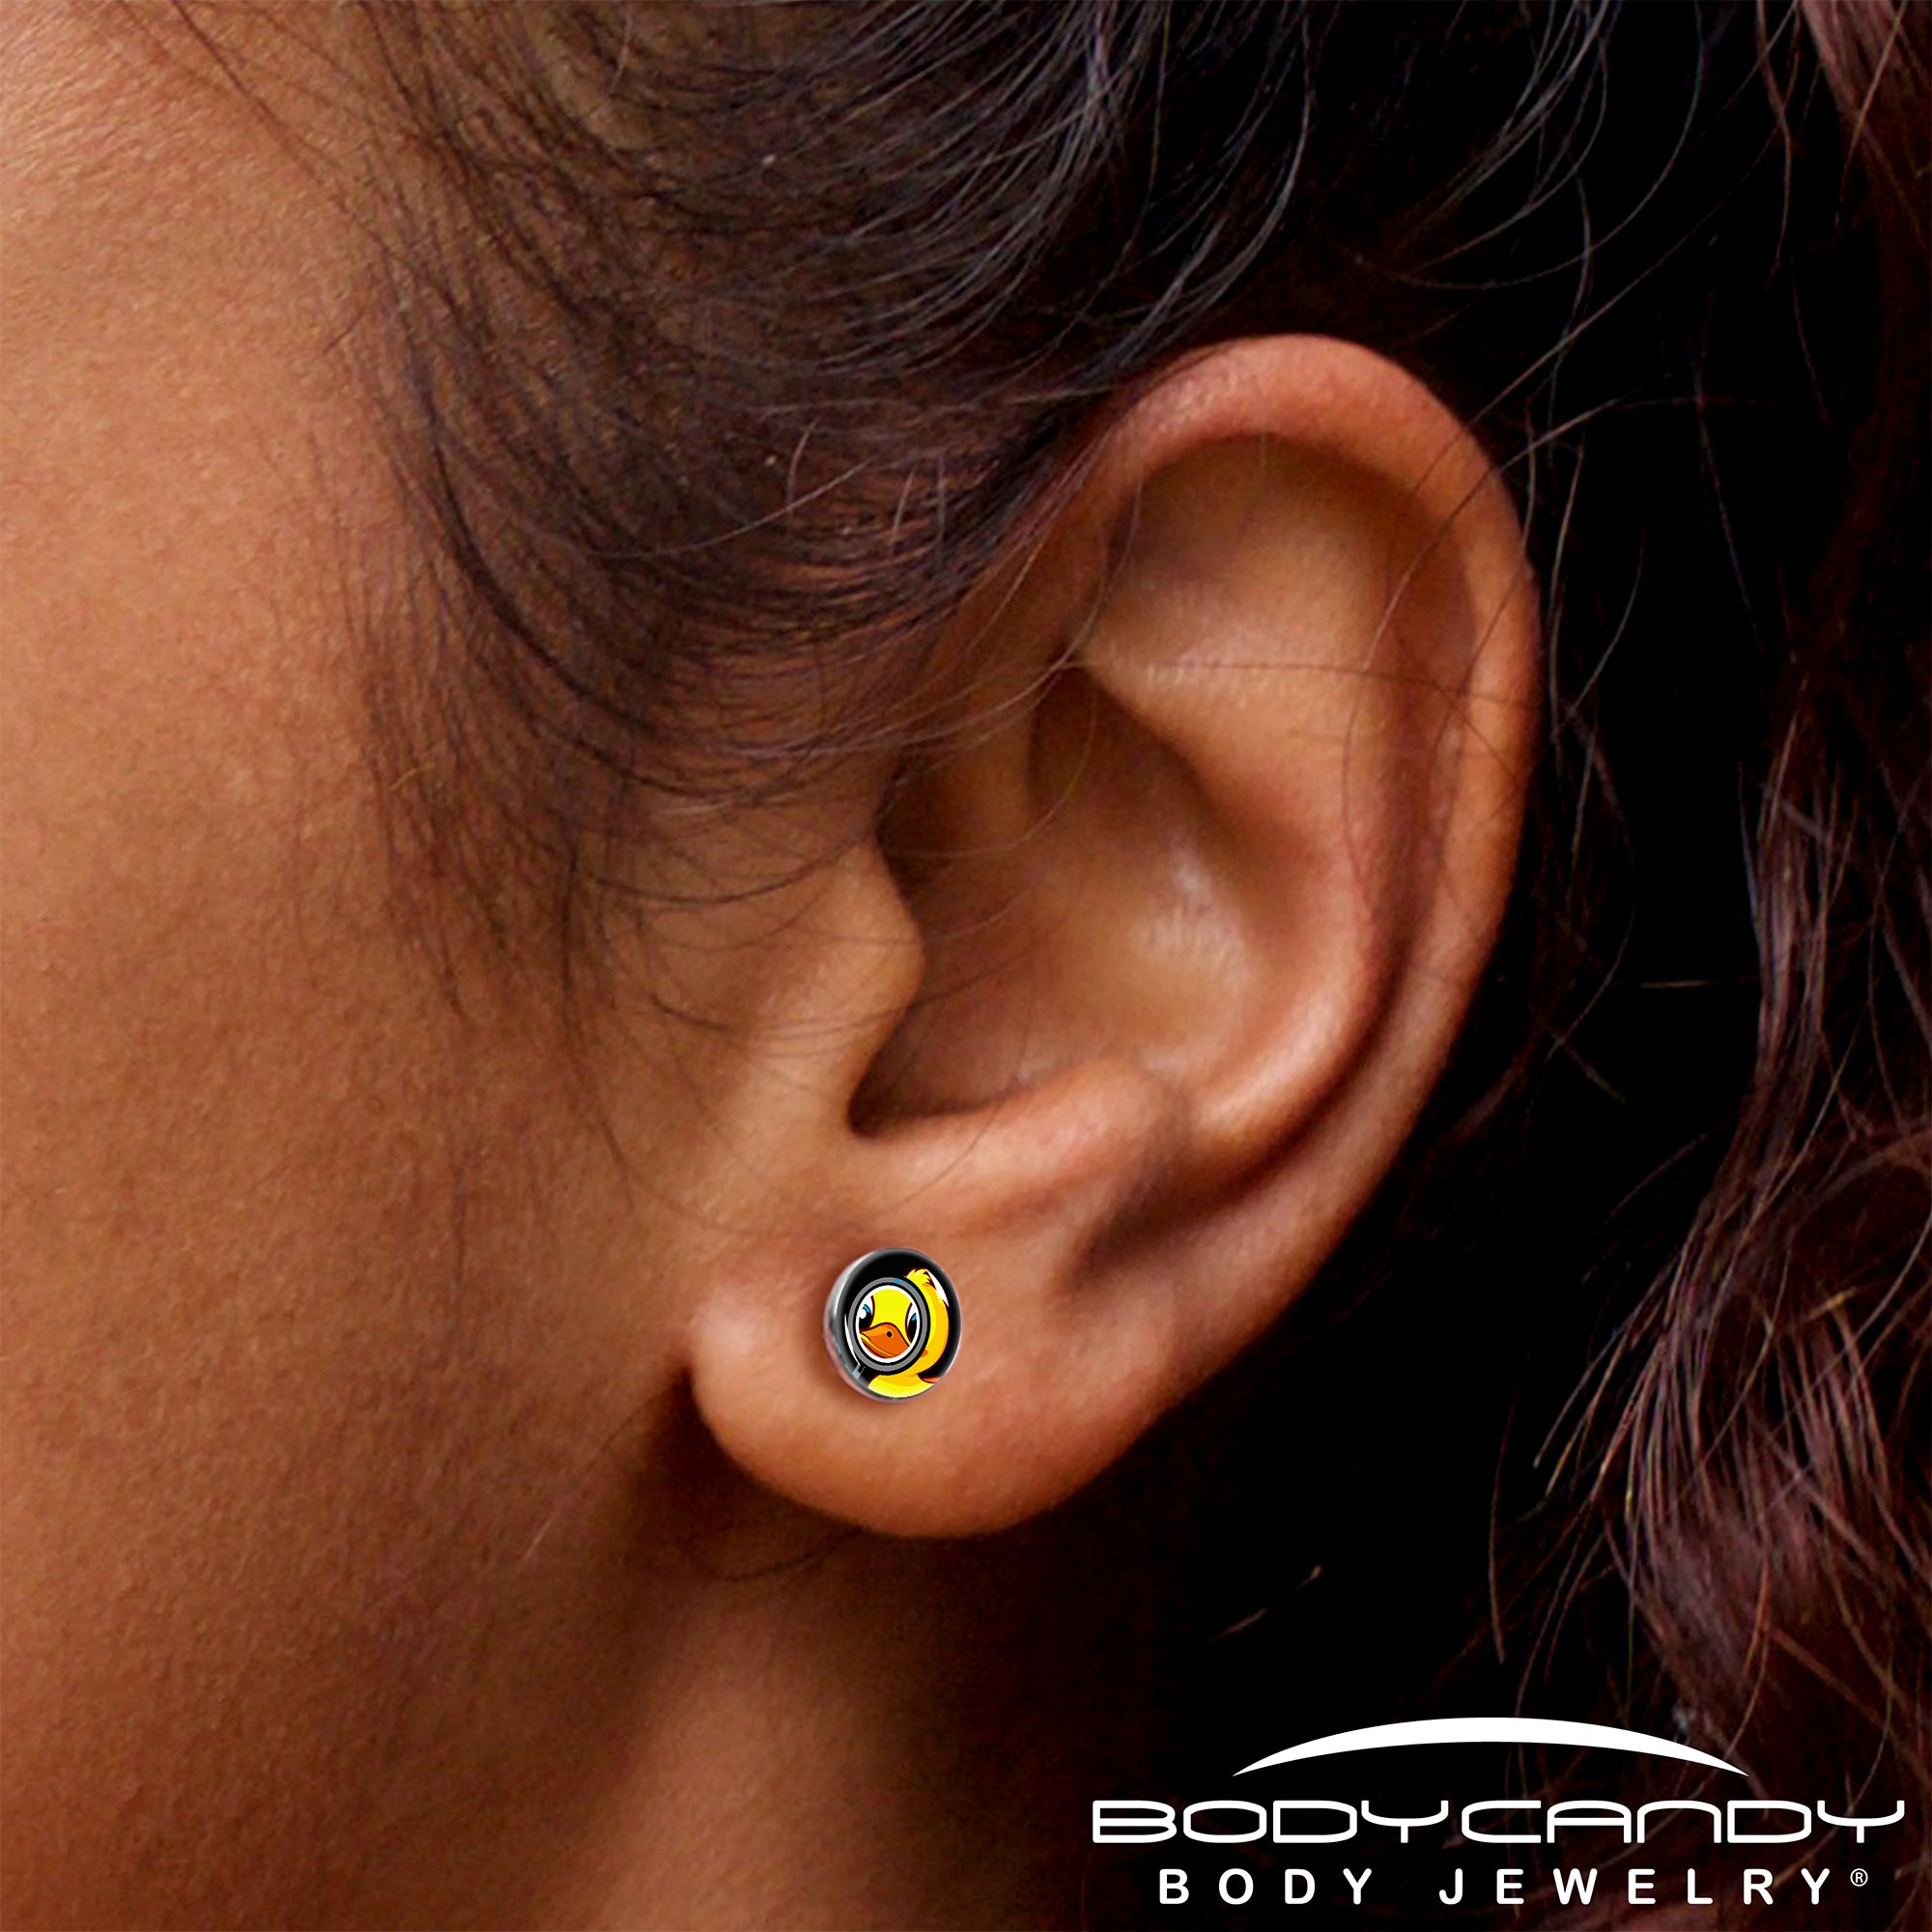 Magnified Yellow Duck Stud Earrings